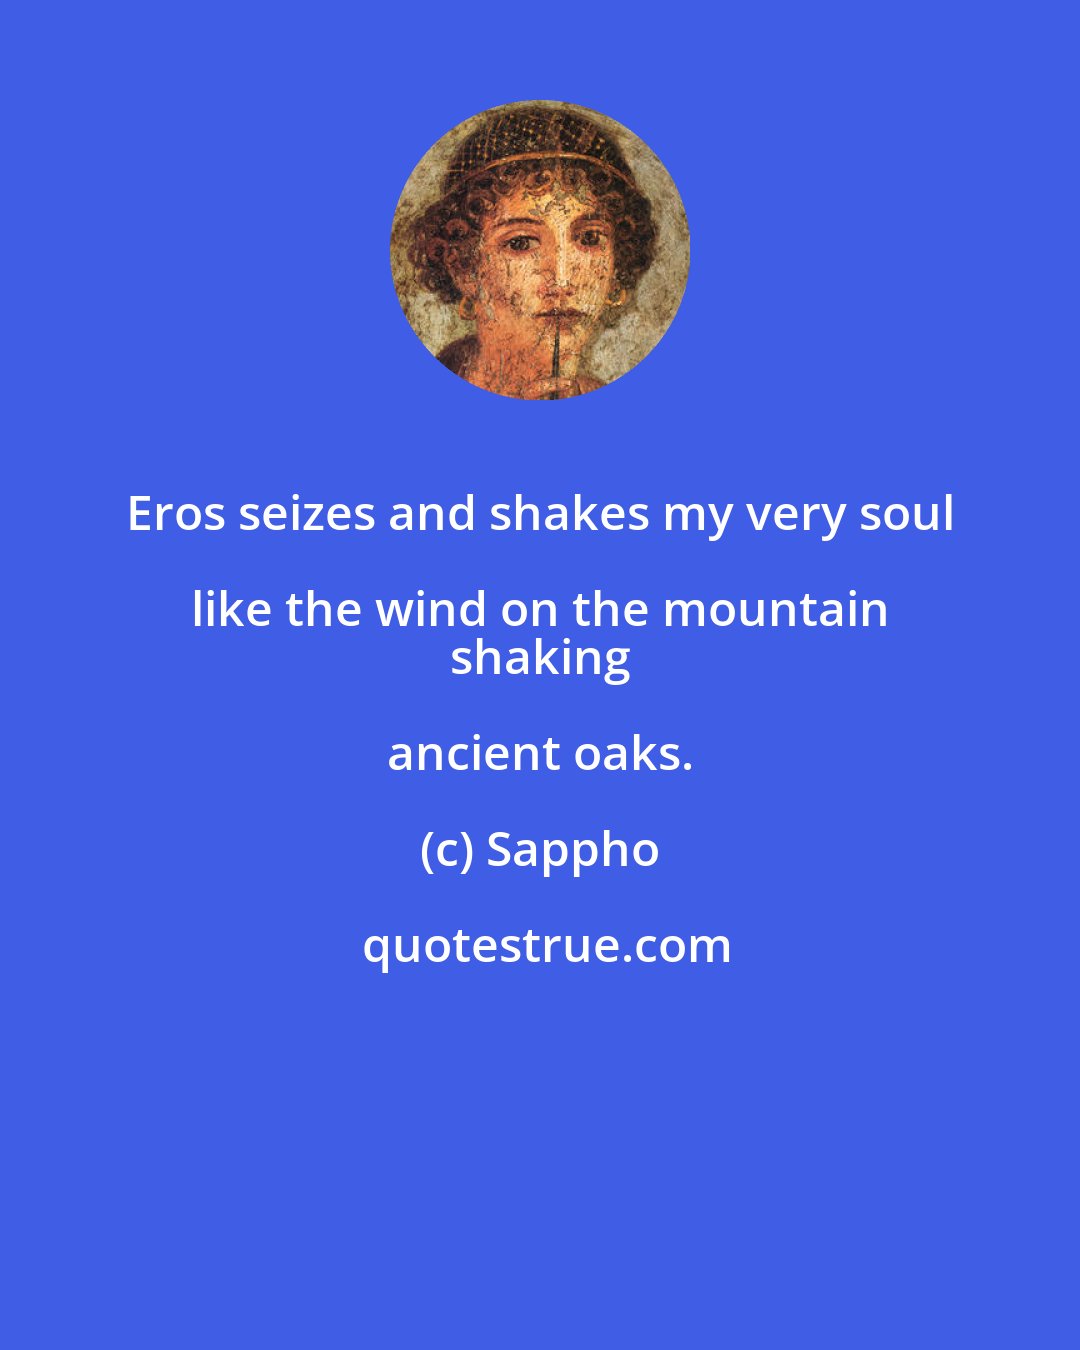 Sappho: Eros seizes and shakes my very soul like the wind on the mountain 
 shaking ancient oaks.